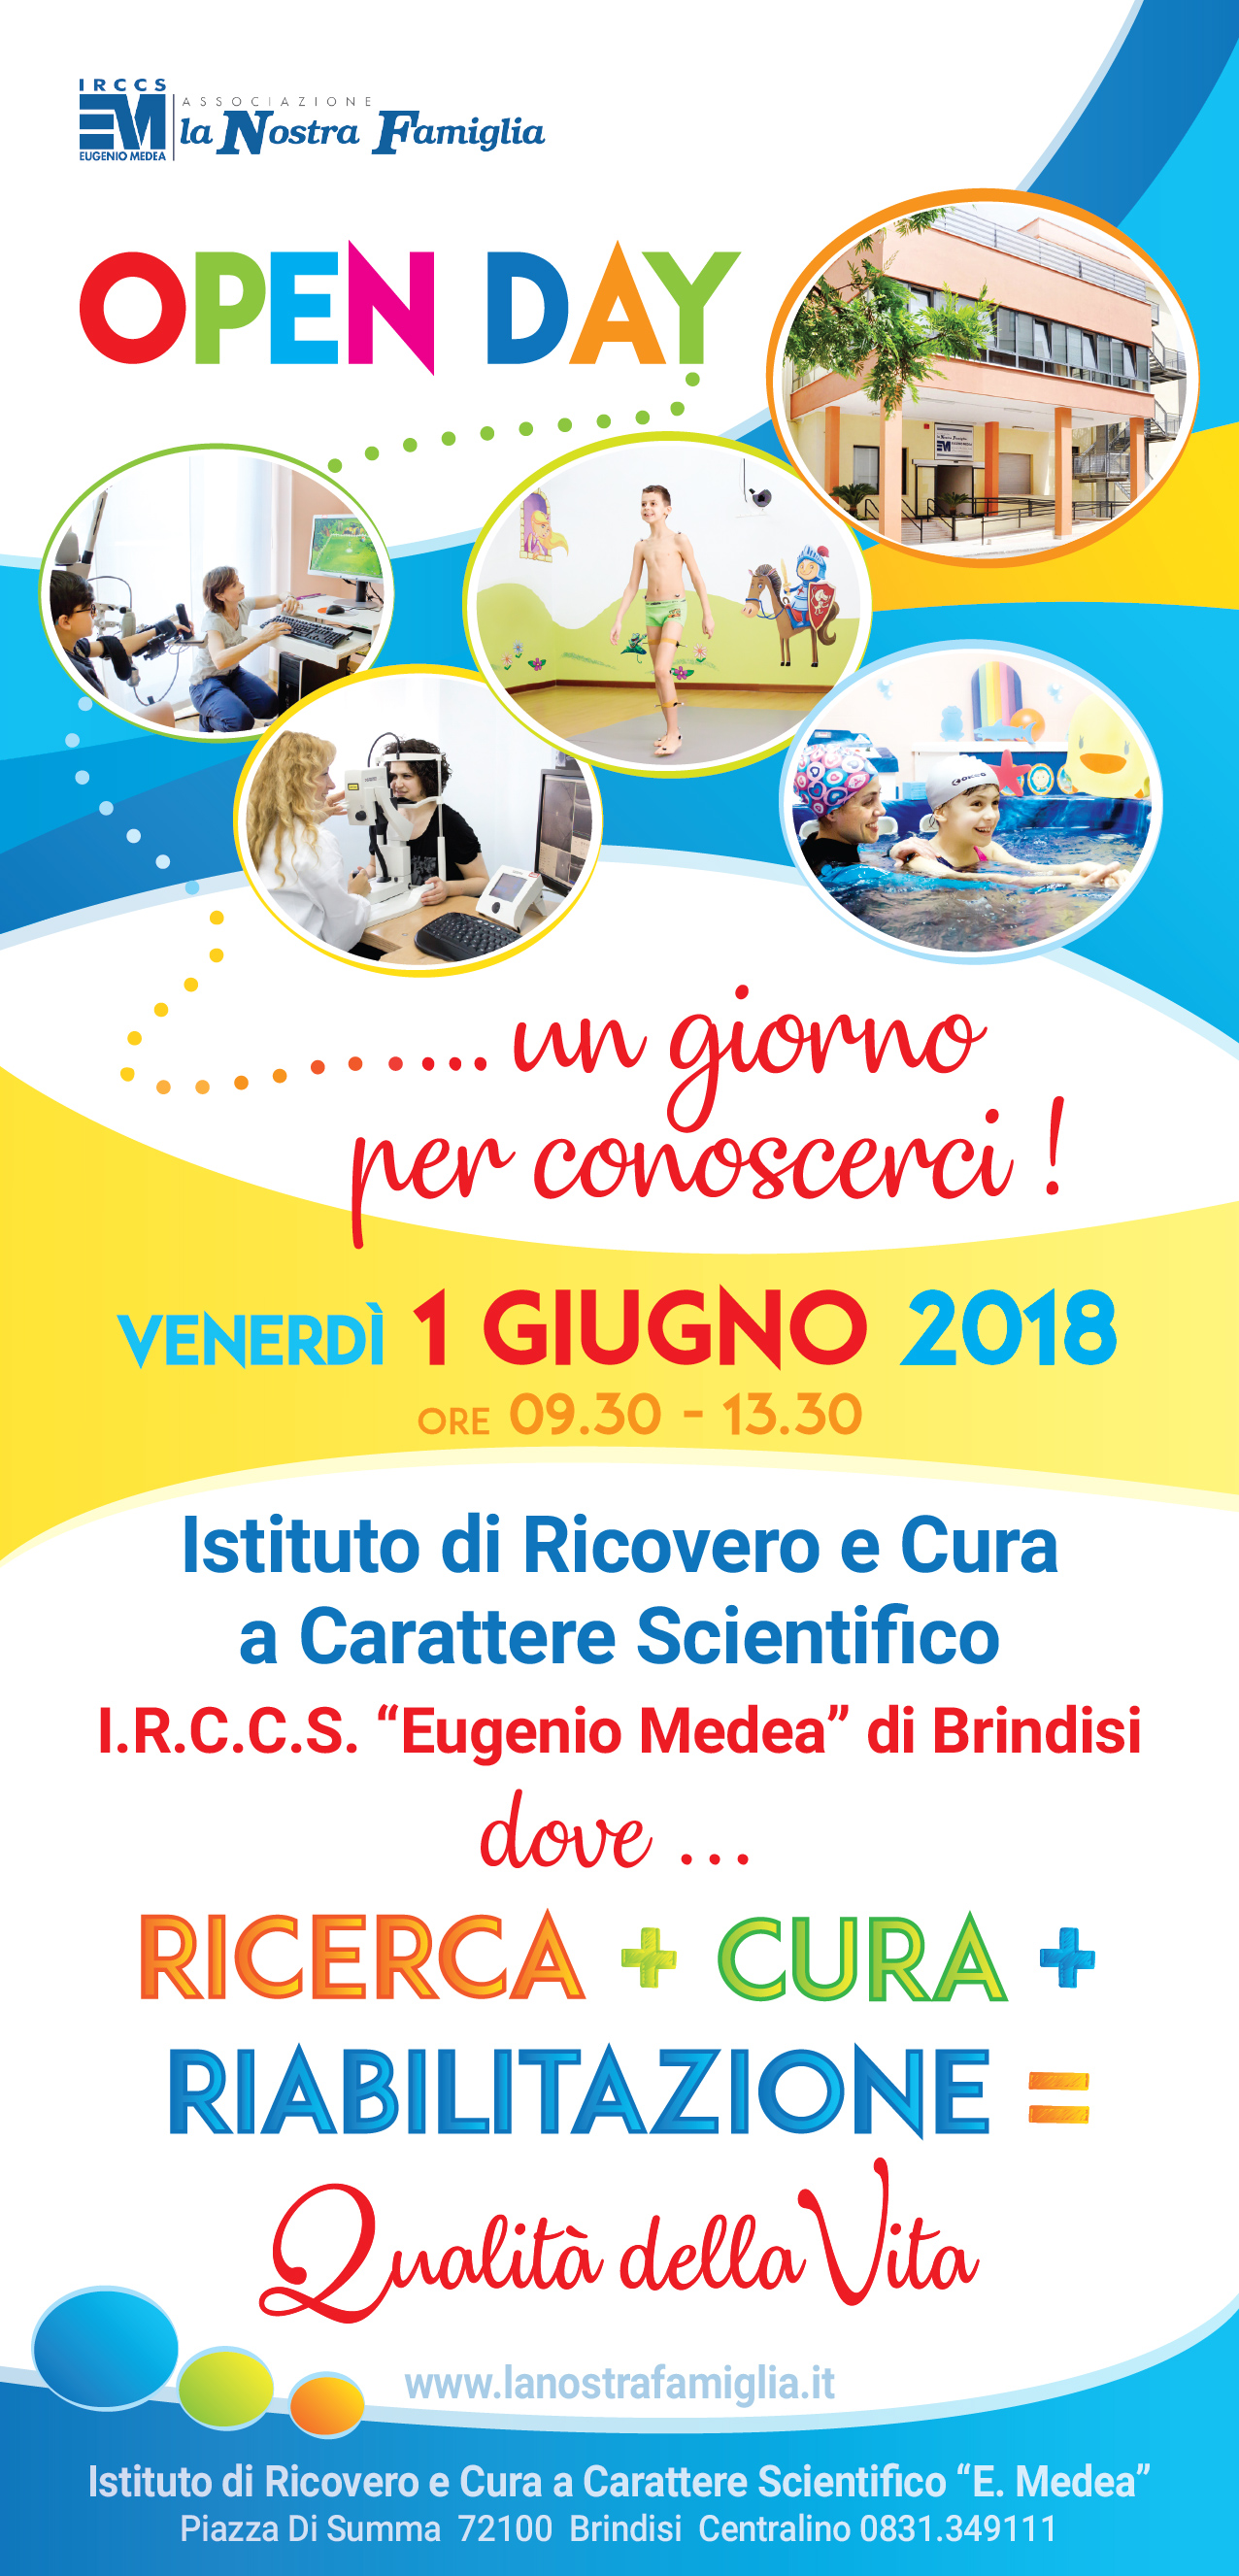 OPEN DAY IRCCS BRINDISI